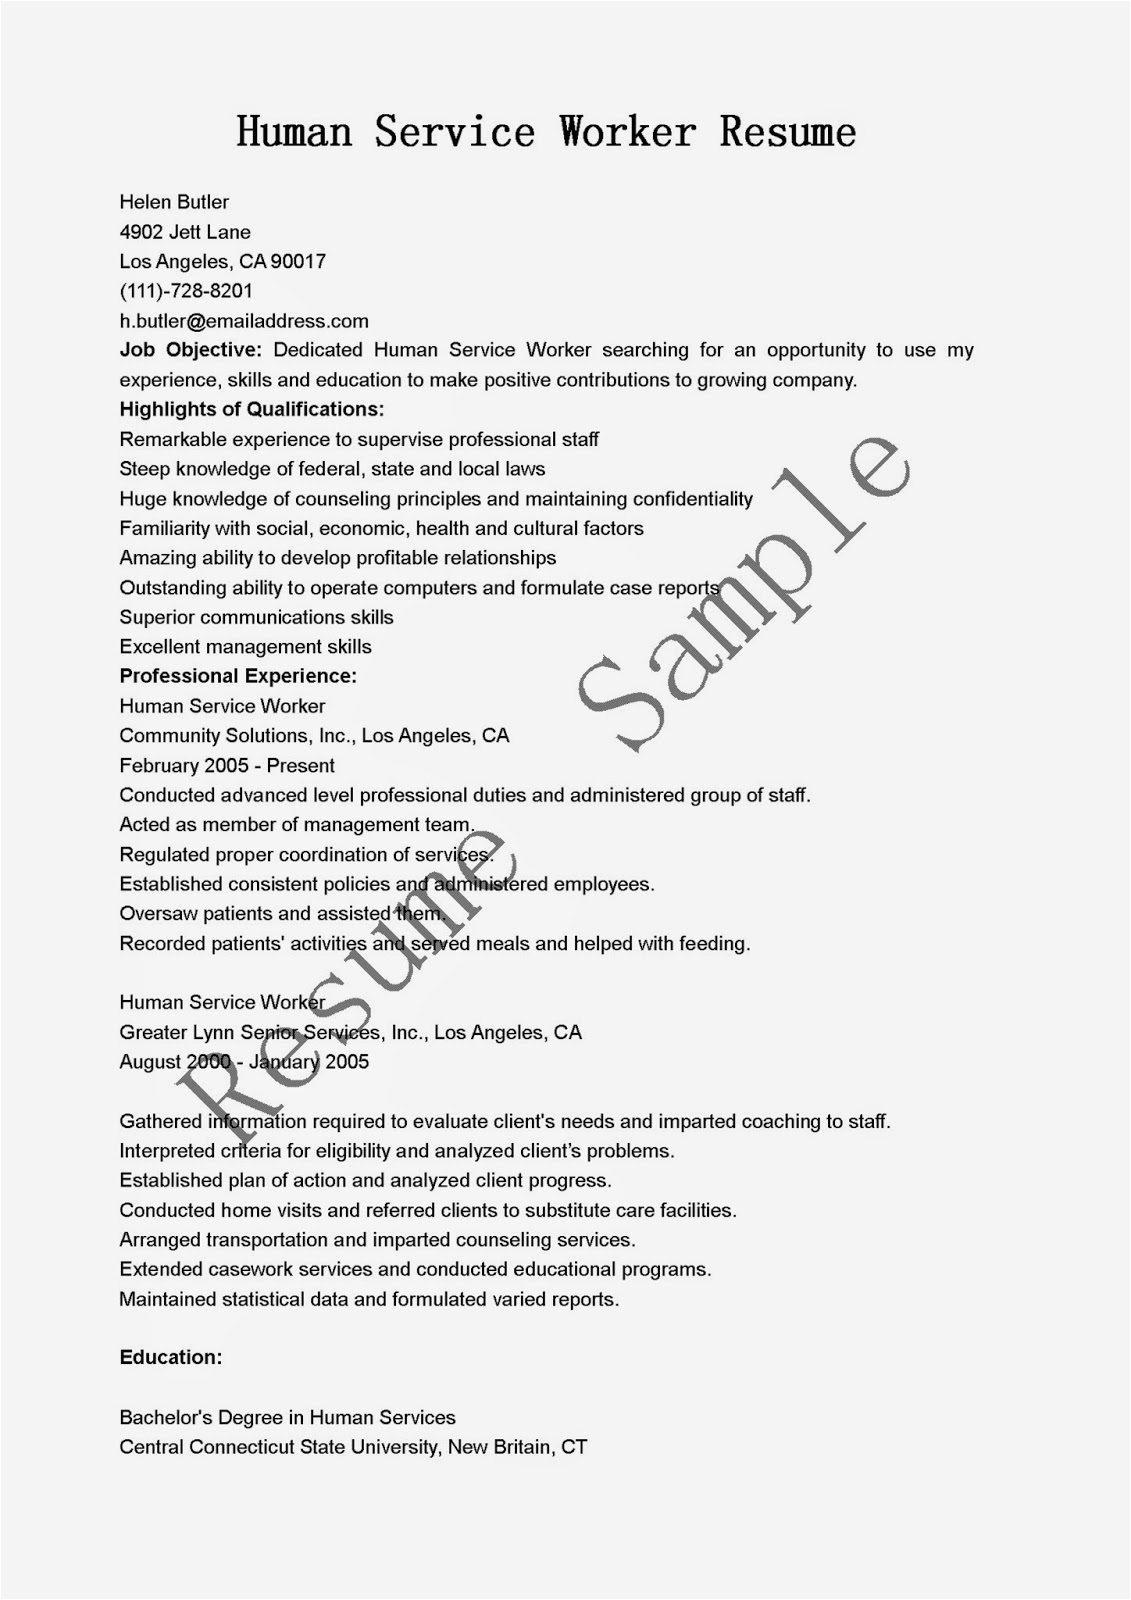 Sample Resume for Human Services Position Resume Samples Human Service Worker Resume Sample